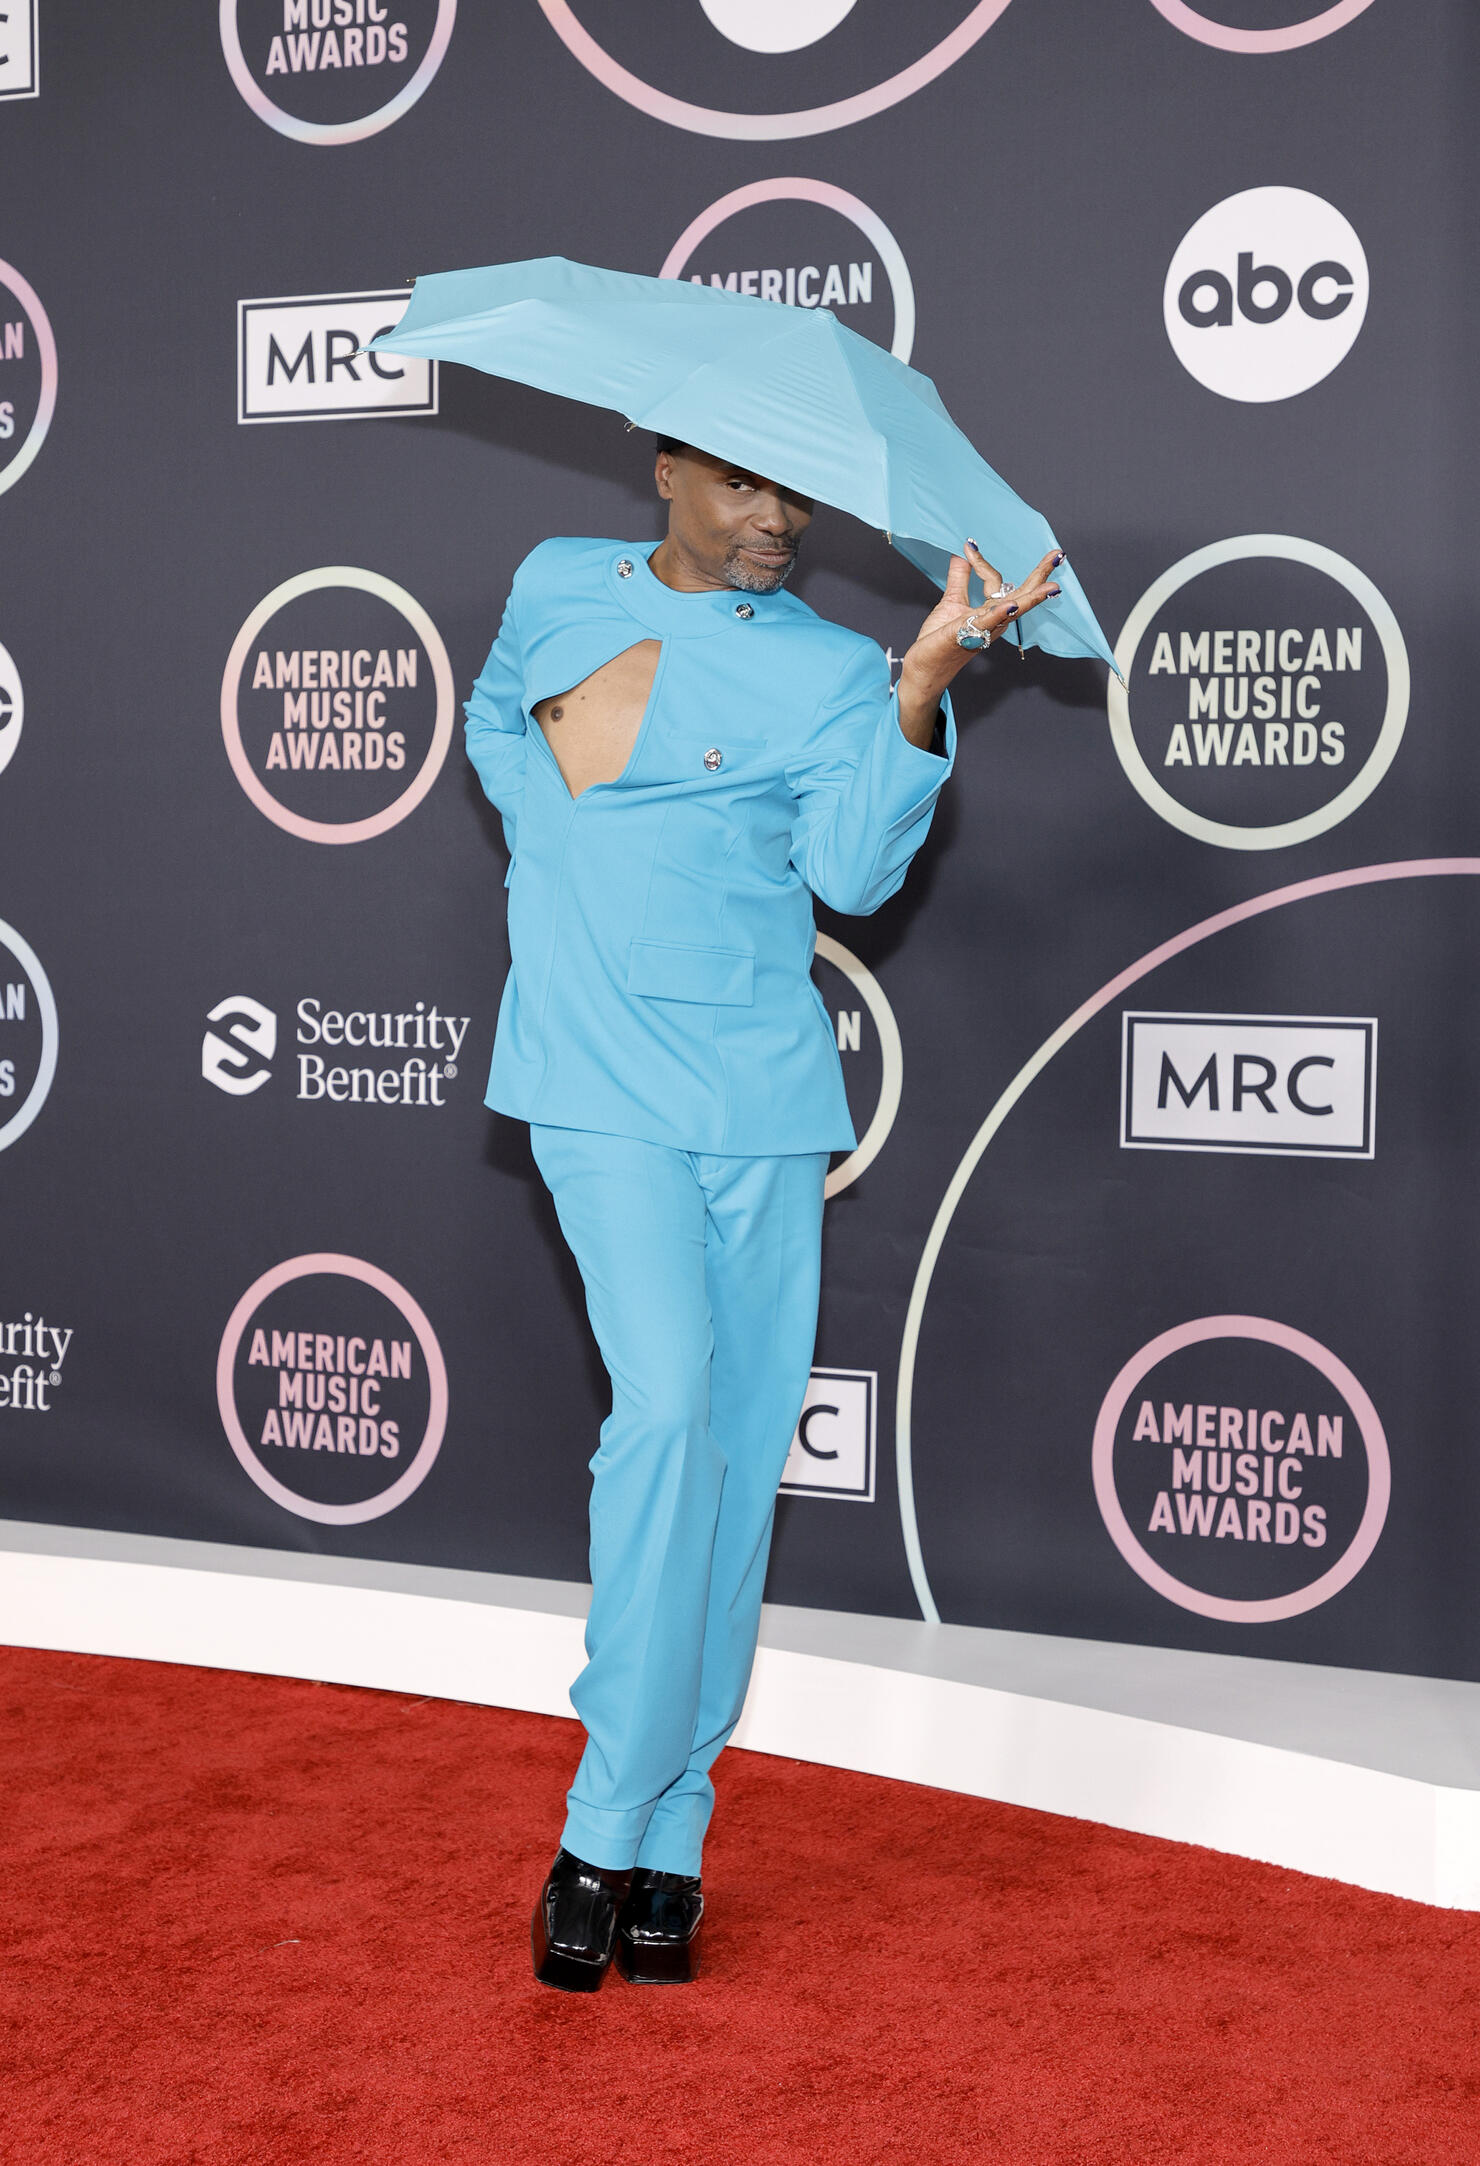 🔴 American Music Awards 2021 Red Carpet LIVE, 11/21 6:30pm ET